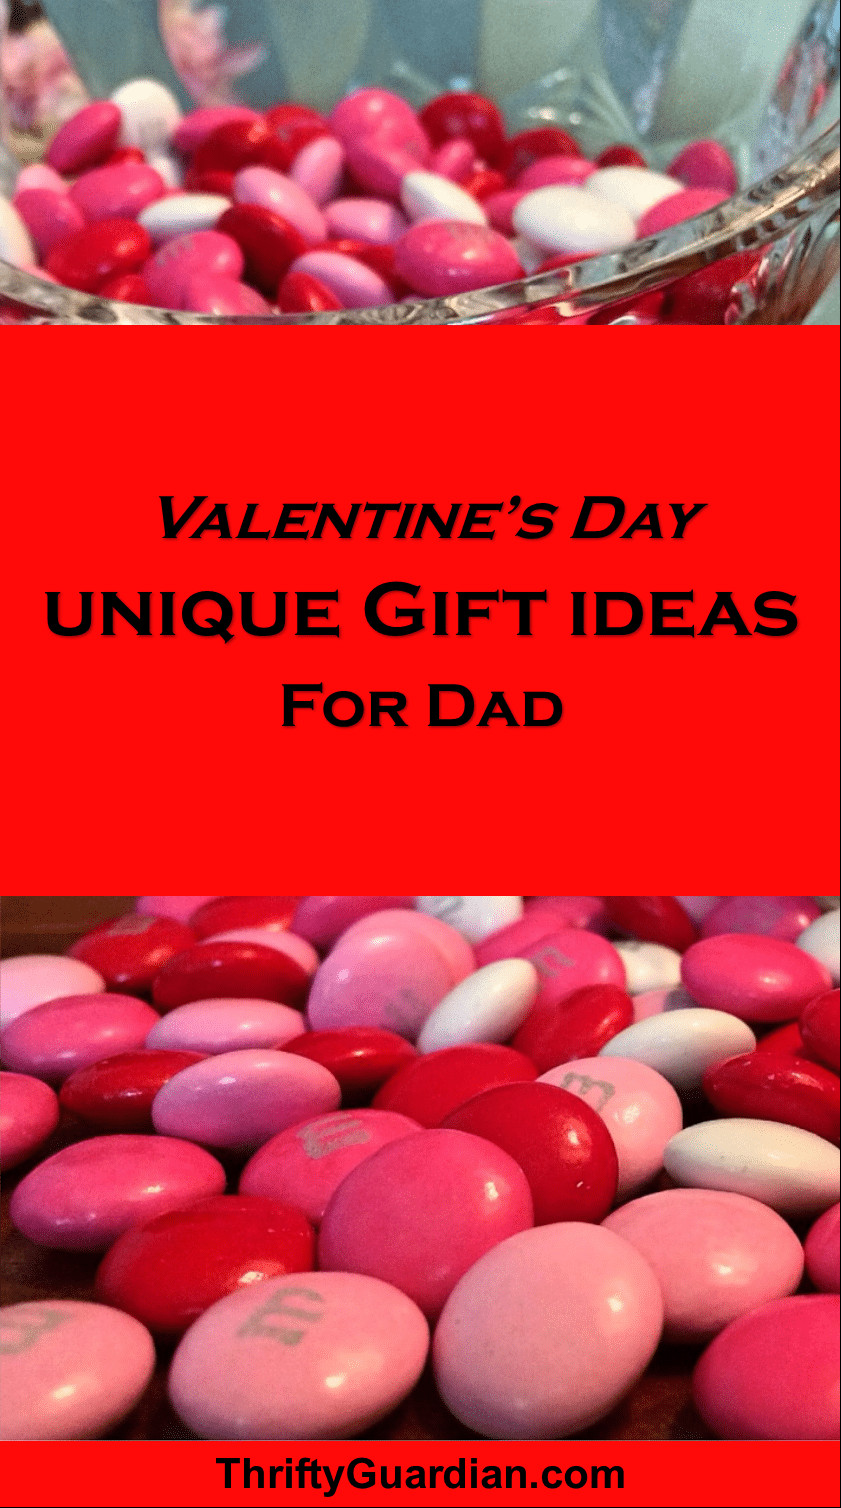 Valentines Gift Ideas For Dad
 Valentine s Day Gift Ideas for Dad Thrifty Guardian